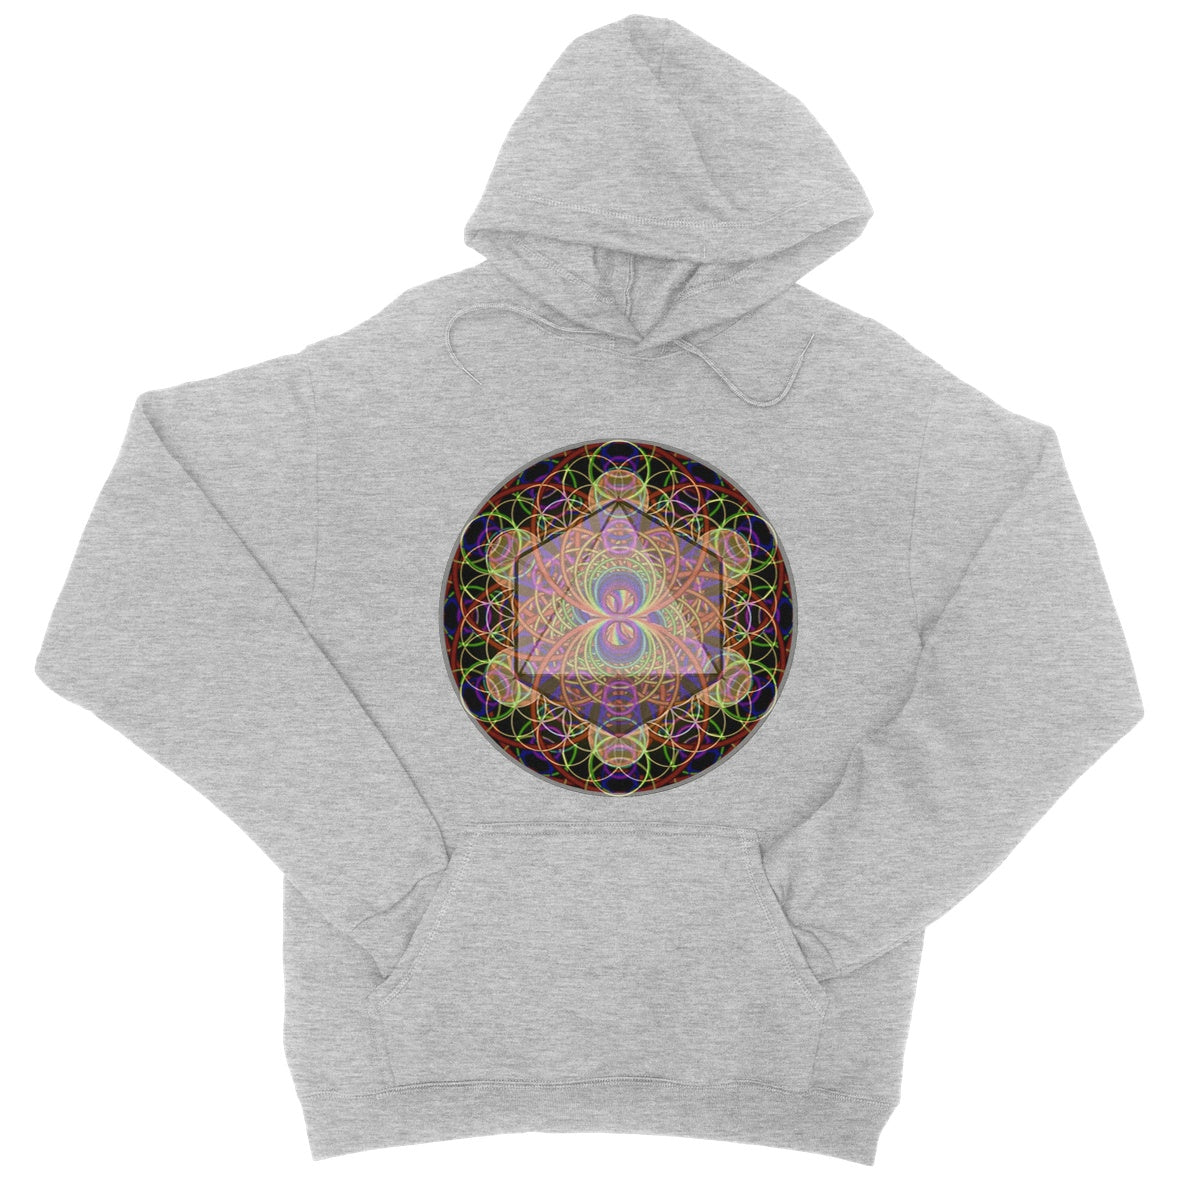 The Platonic Solid Octahedron College Hoodie